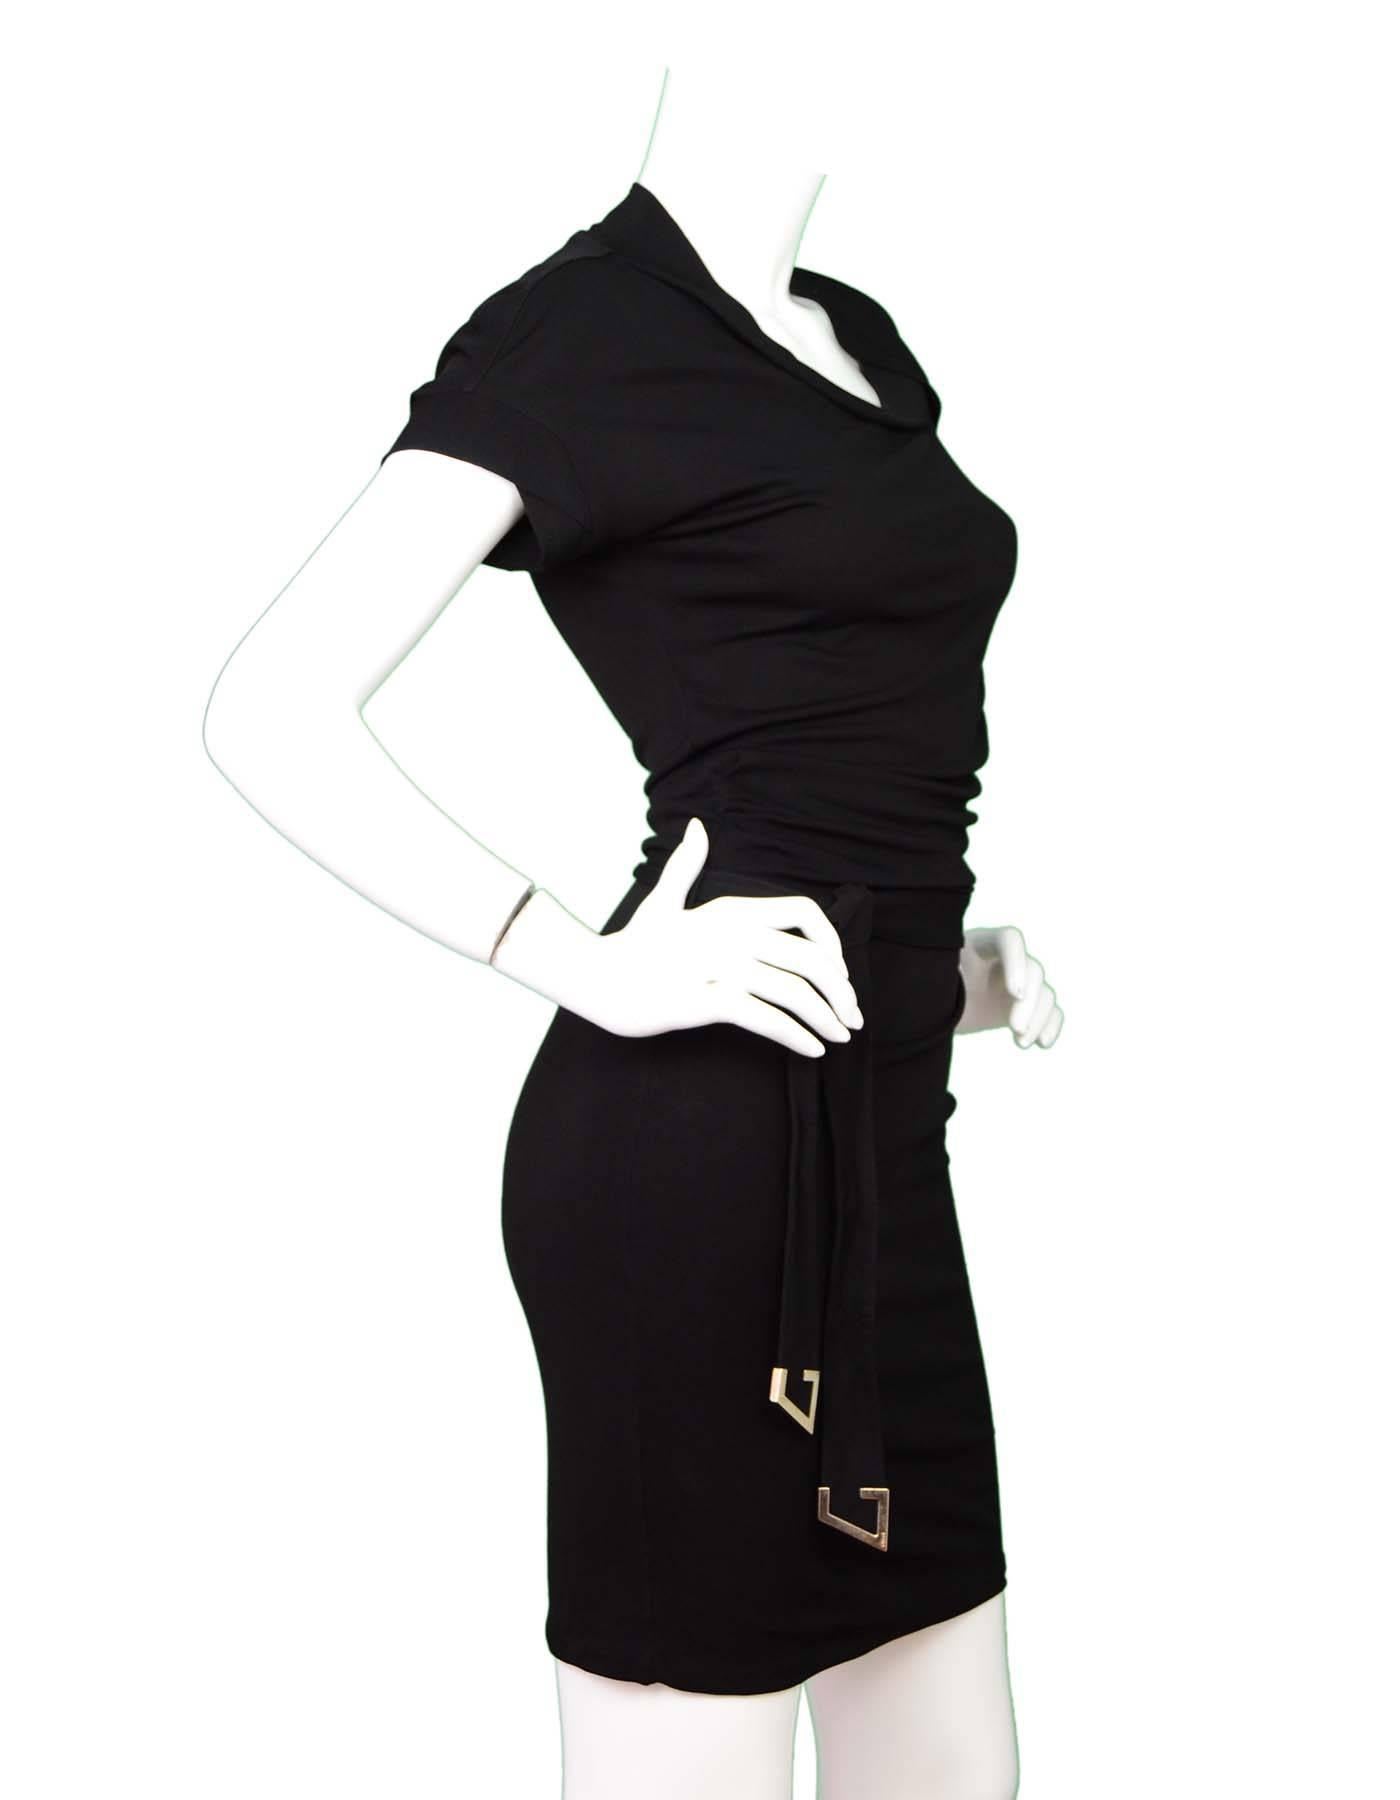 Gucci Black Dress with Belt Sz S

Features short sleeves and cowl neckline with tie belt at wasit

Made In: Italy
Color: Black
Composition: 100% Rayon
Lining: None
Closure/Opening: Hidden side zip closure
Overall Condition: Excellent